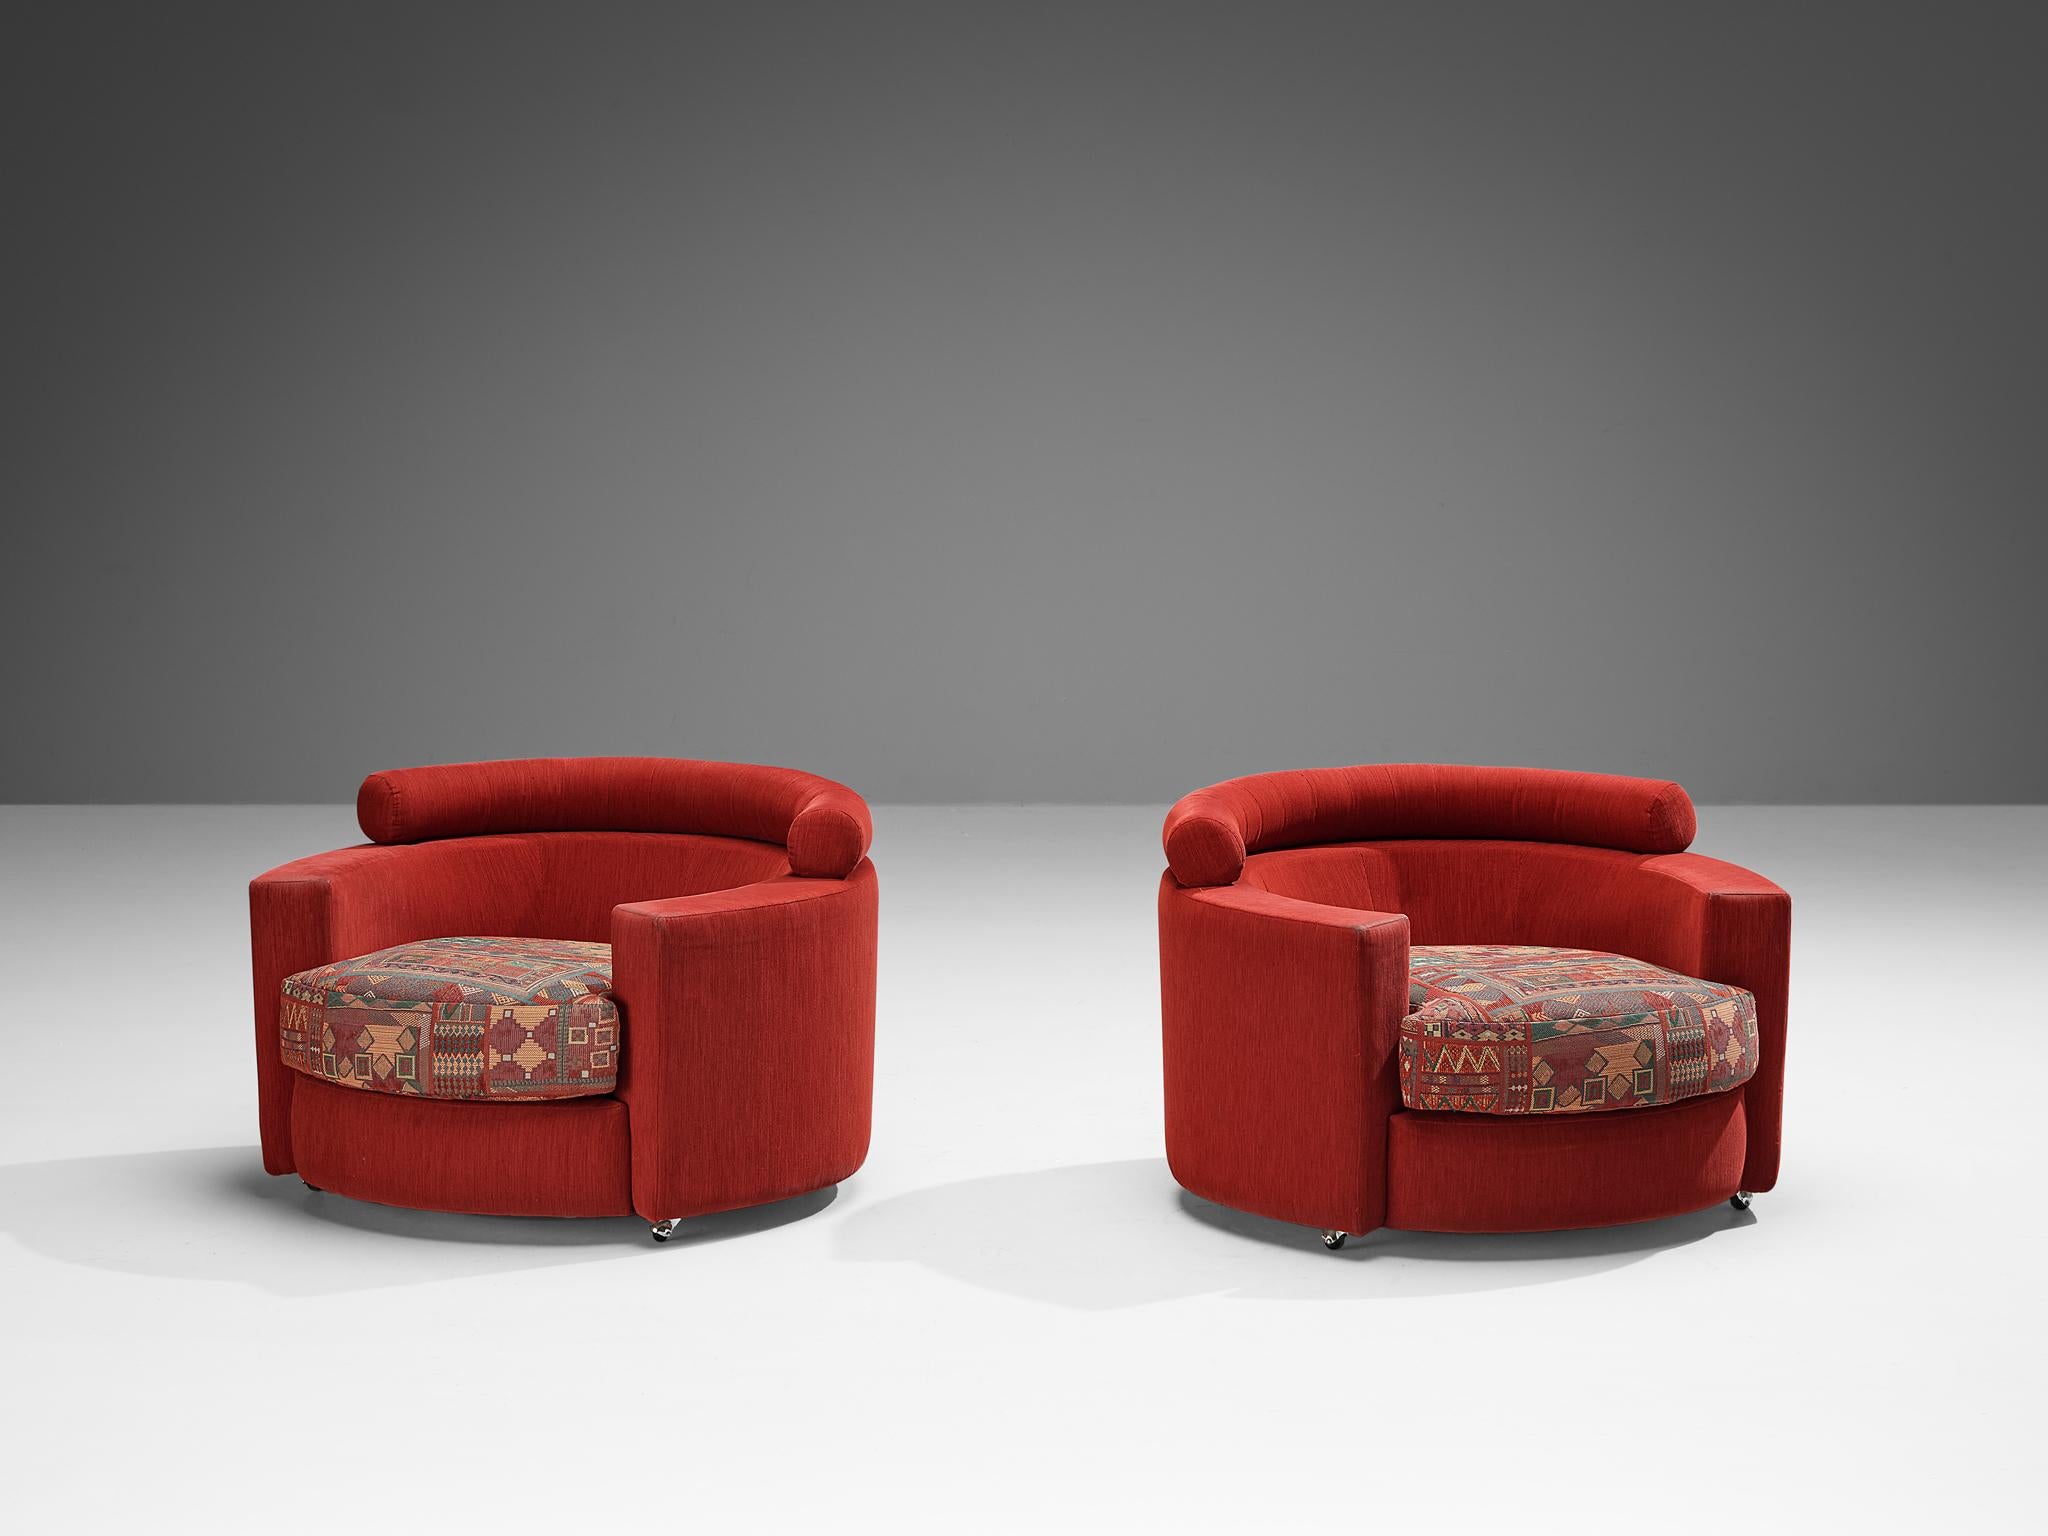 Fabric Roche Bobois Pair of Lounge Chairs in Red and Patterned Upholstery For Sale